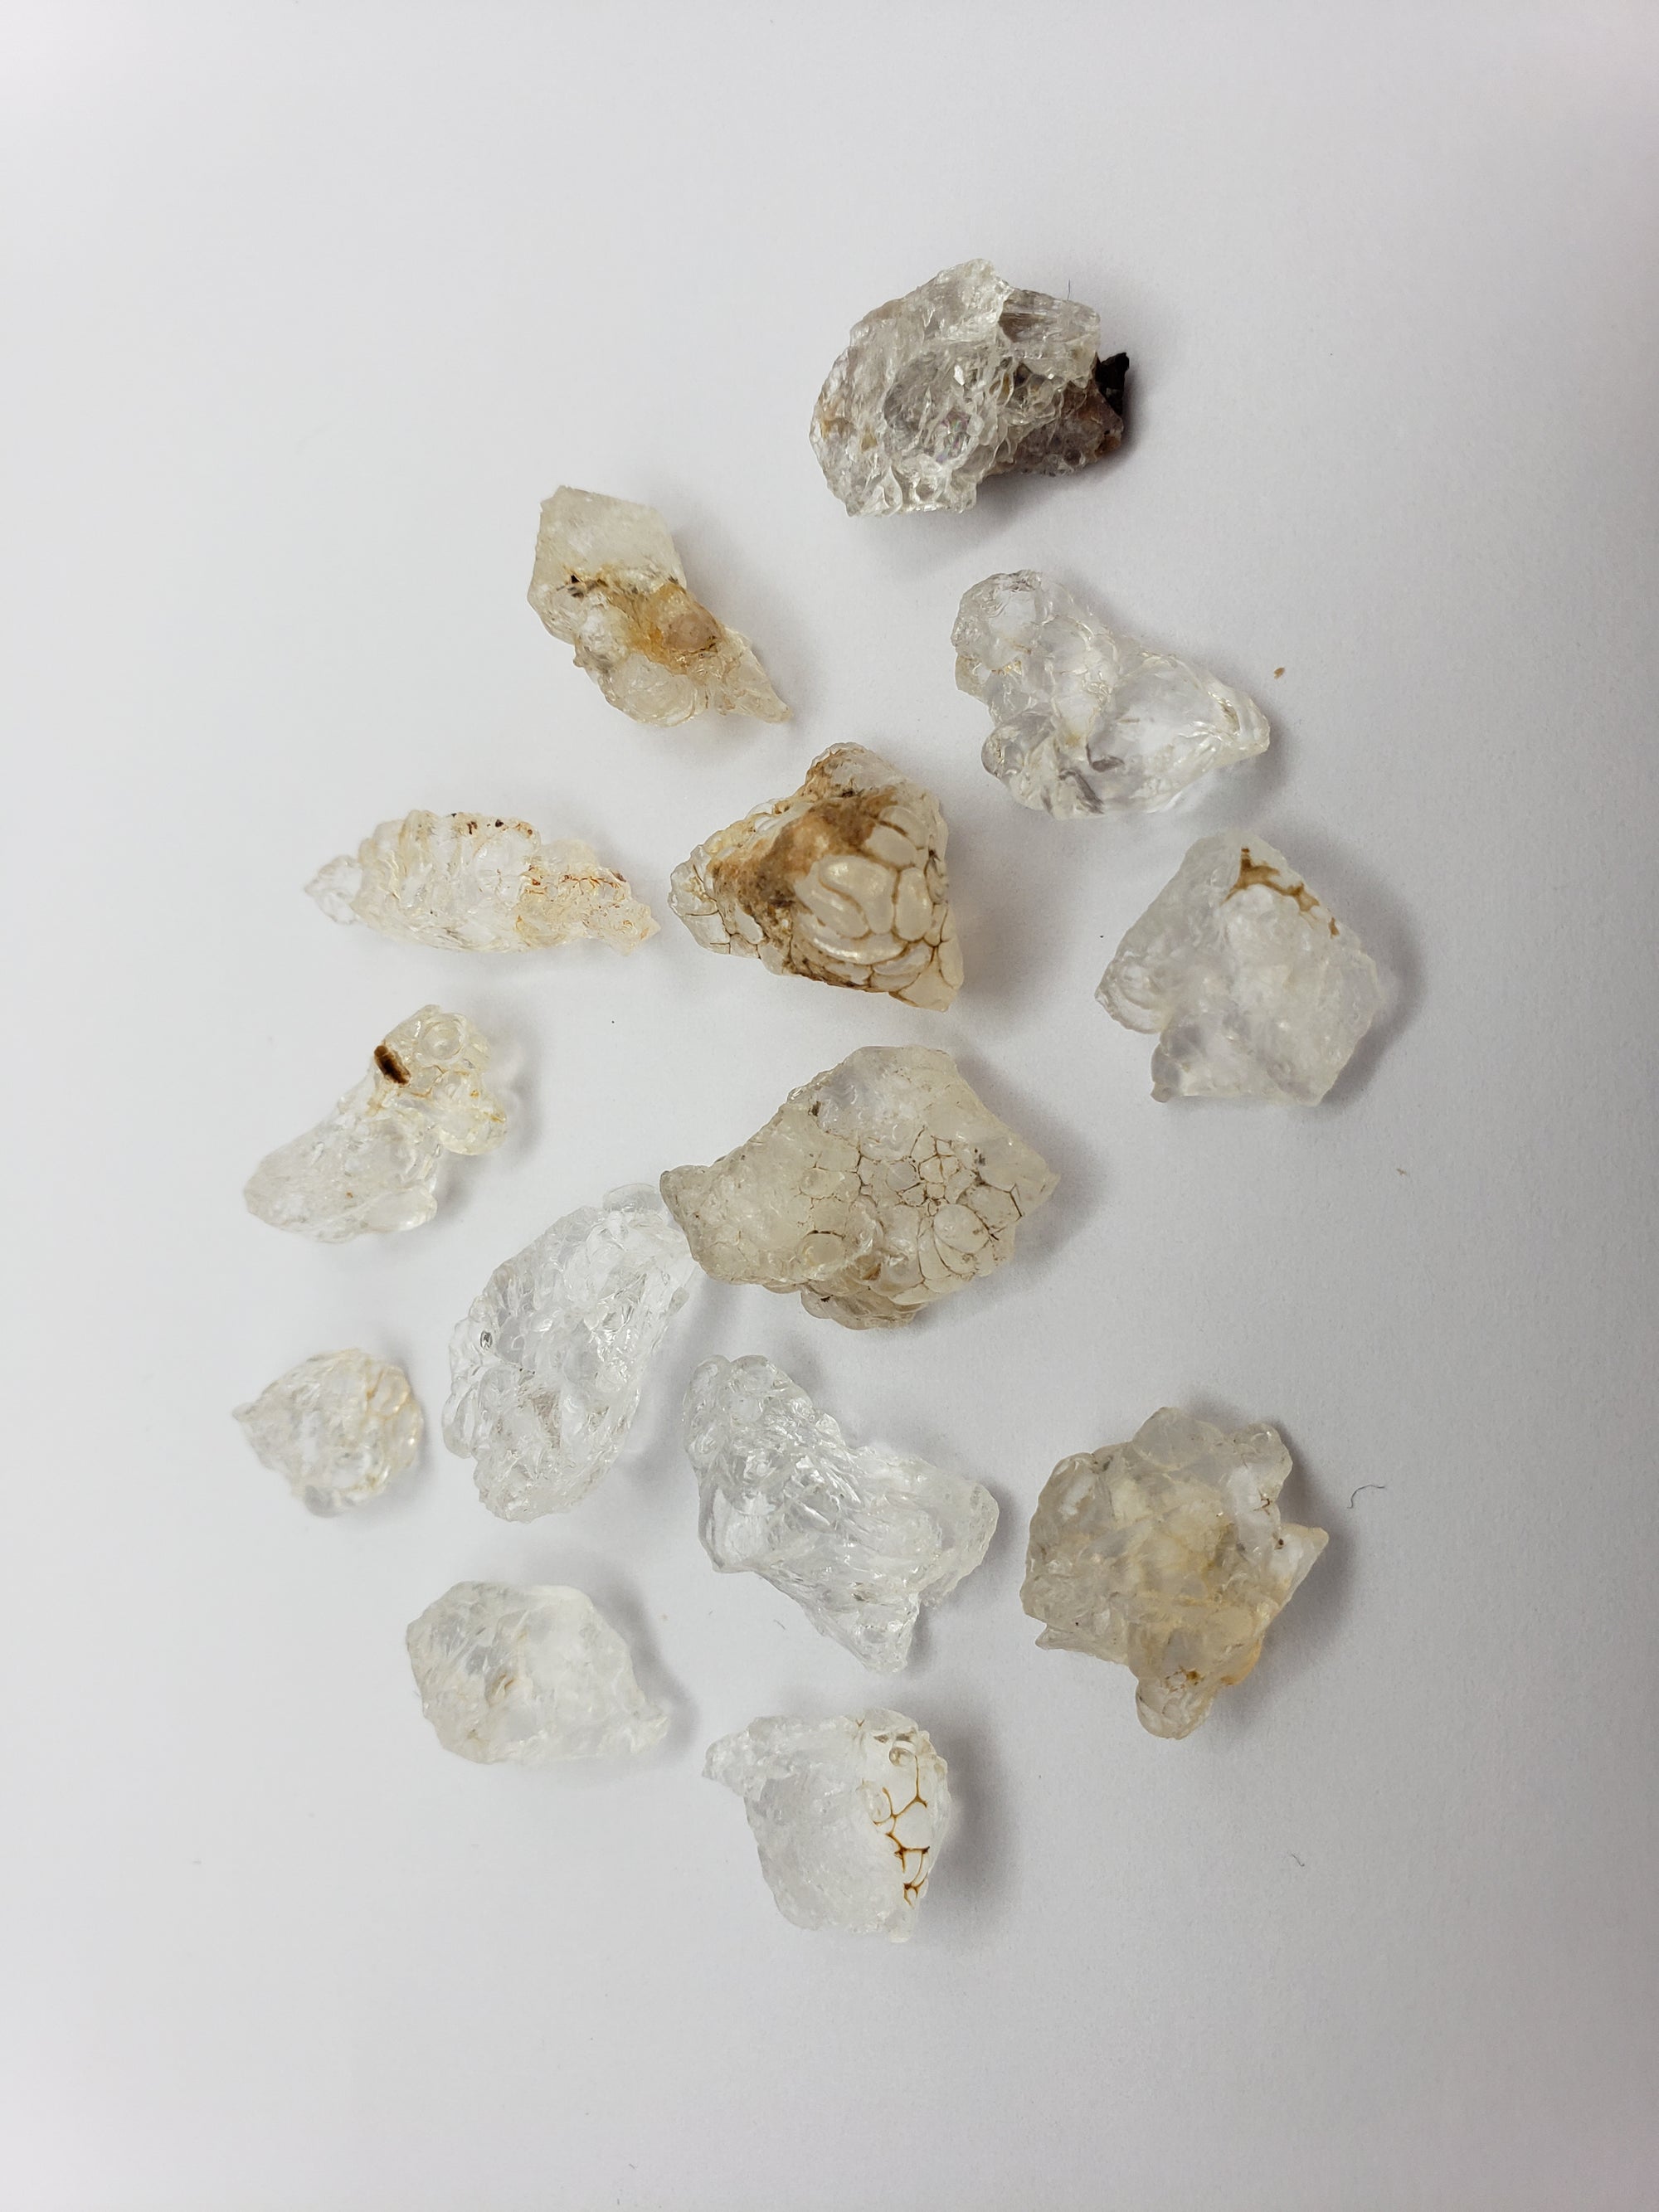 hyalite pieces on white background